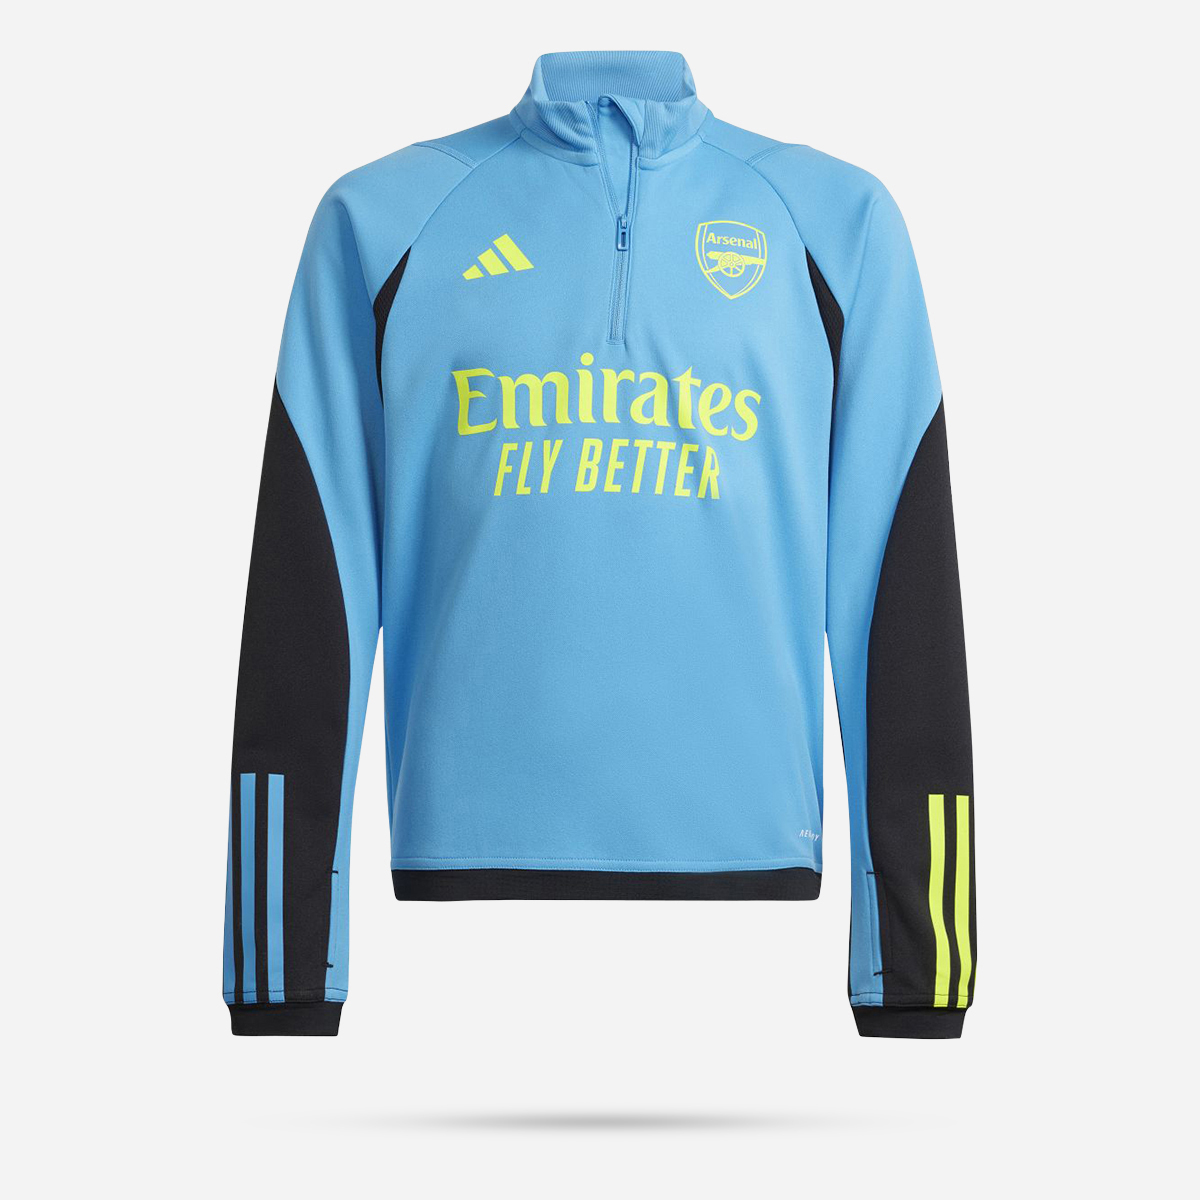 AN308589 Arsenal tr top y